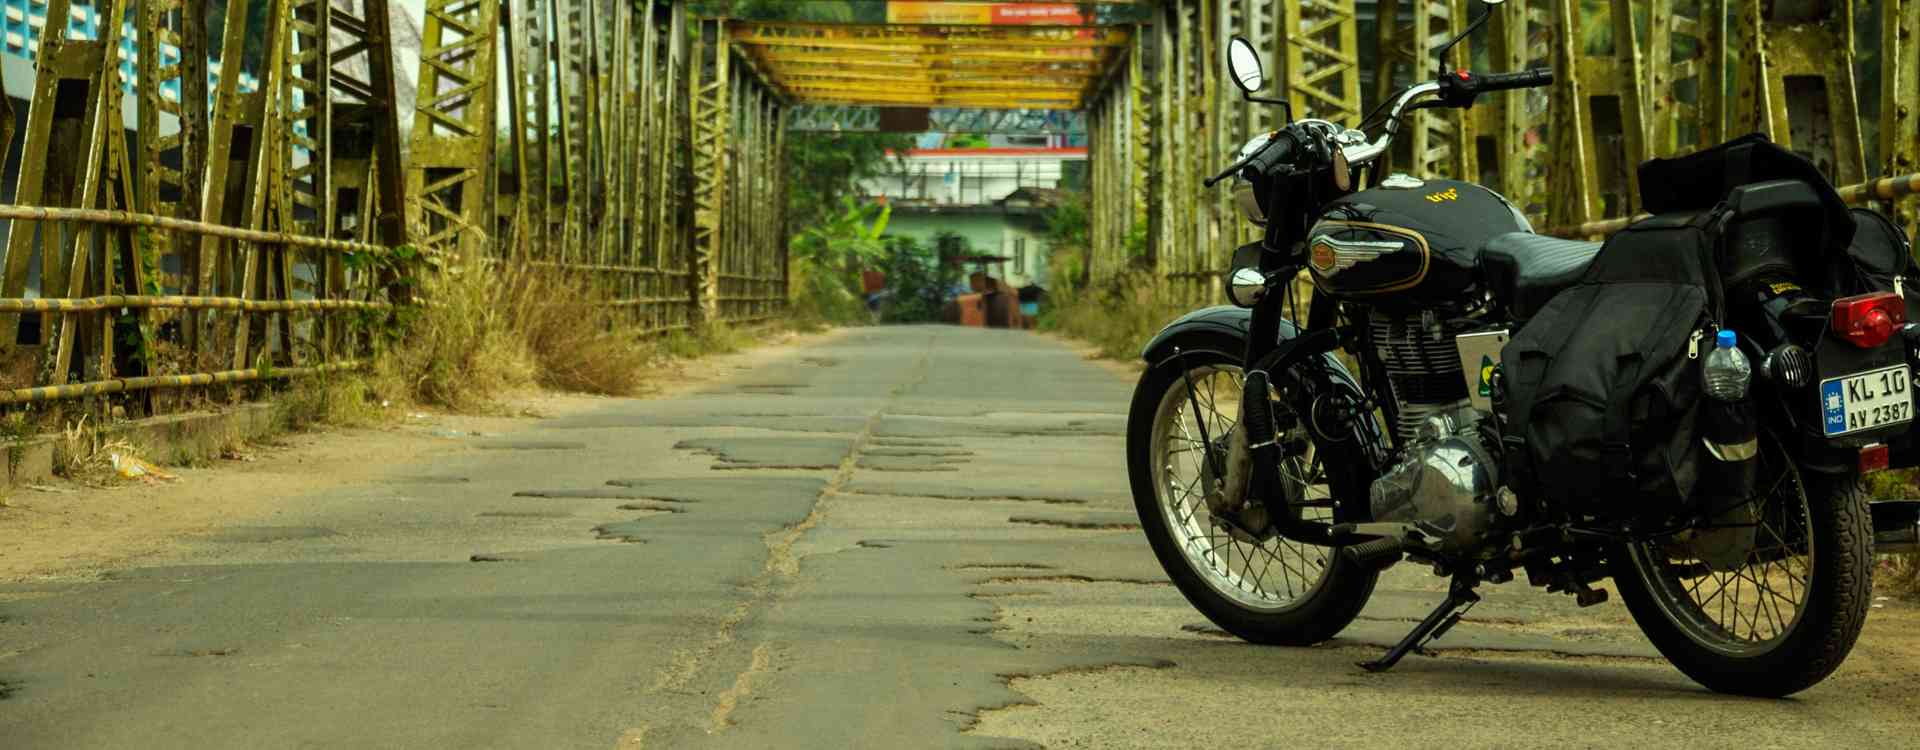 Bullet 350 - Reliability on the road